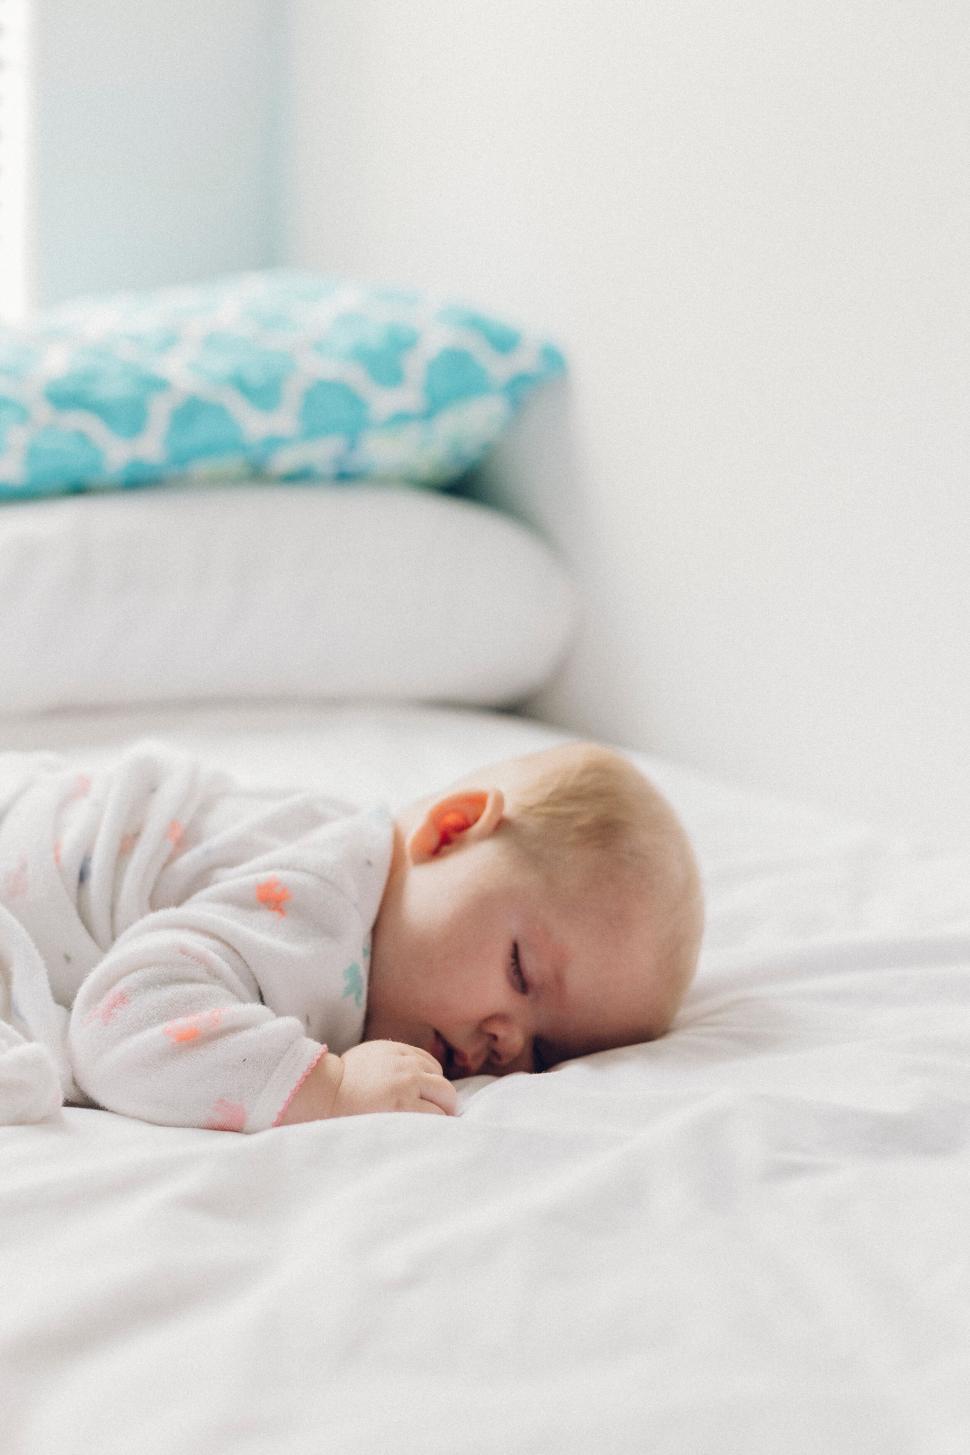 Free Image of Baby resting peacefully in a bright room 